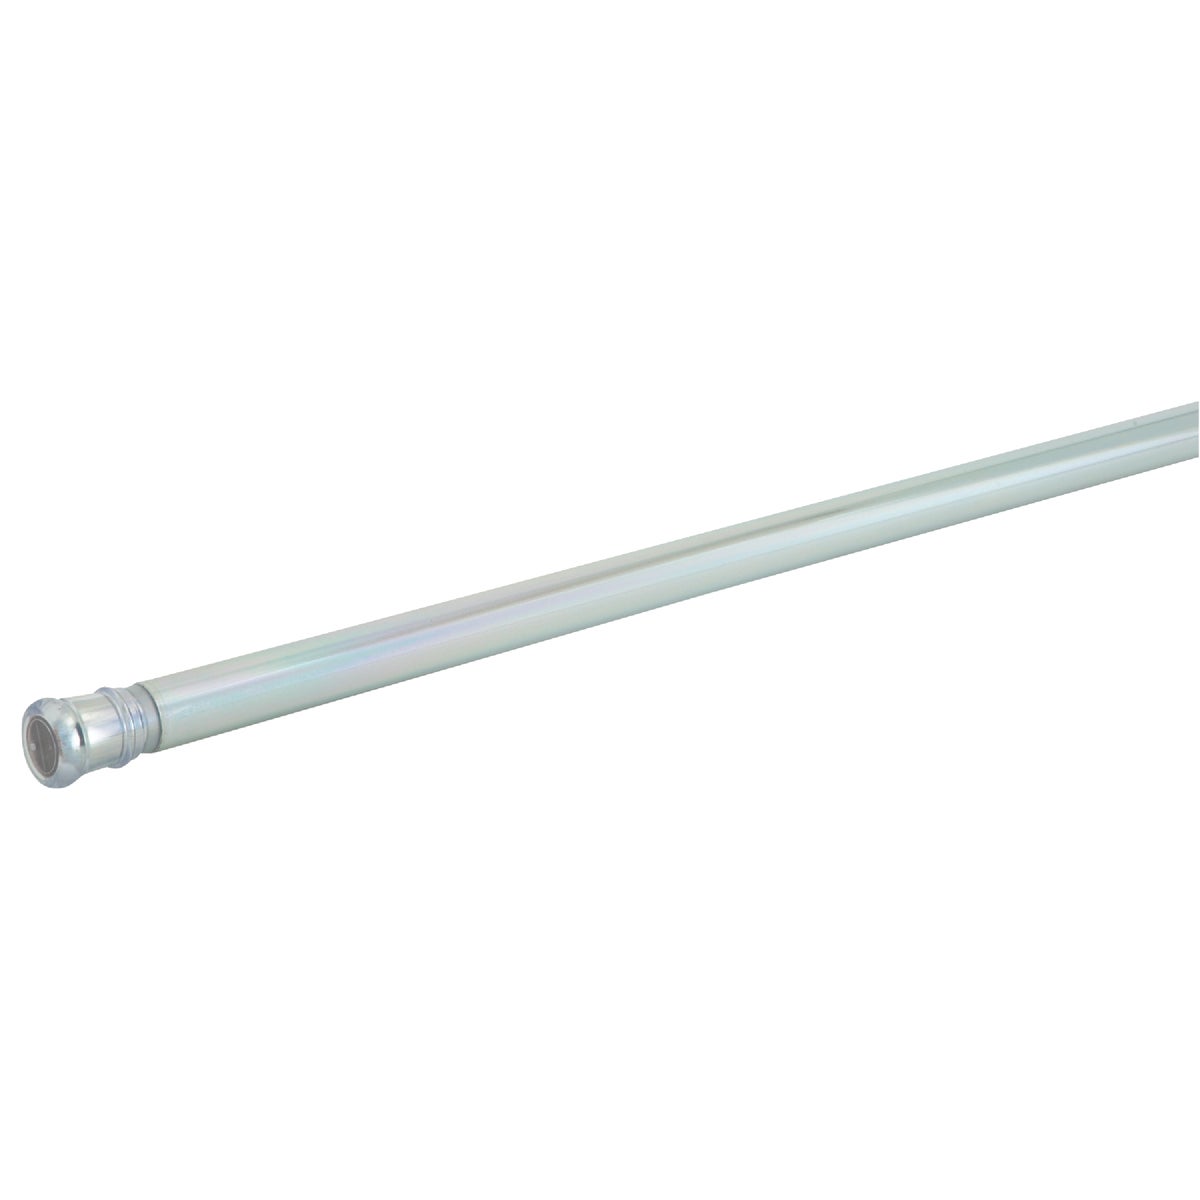 Item 447854, Basic 72" tension shower rod with easy TwistTight installation will hold up